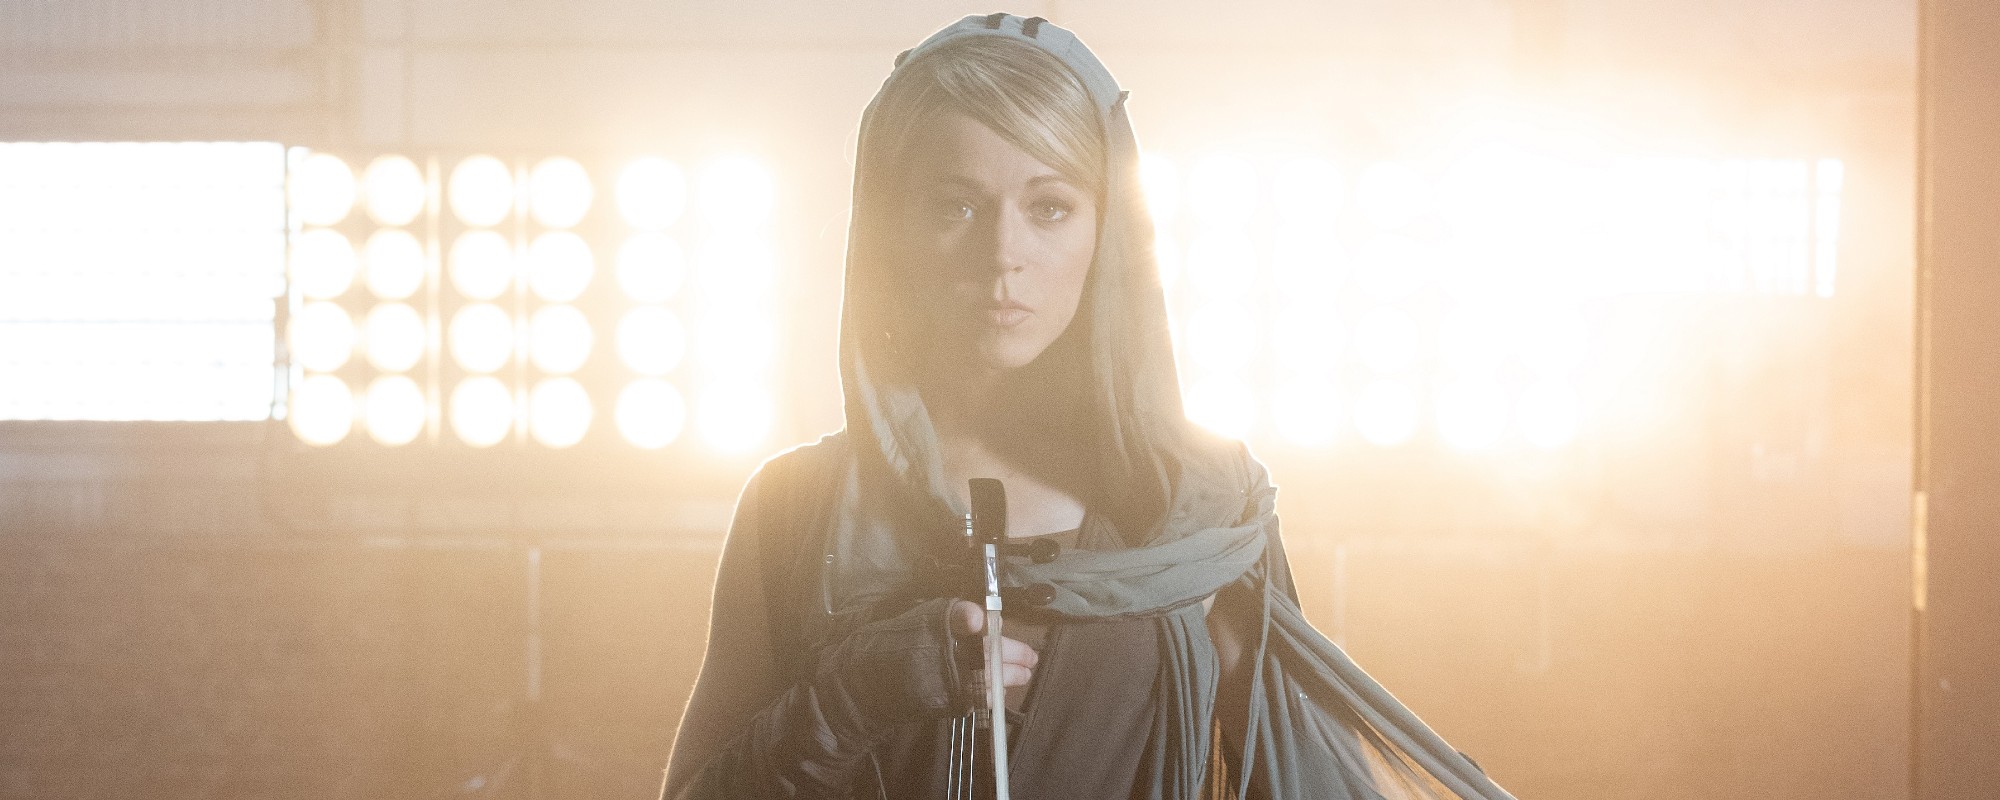 Lindsey Stirling Honors Late Father & Best Friend With “Lose You Now”